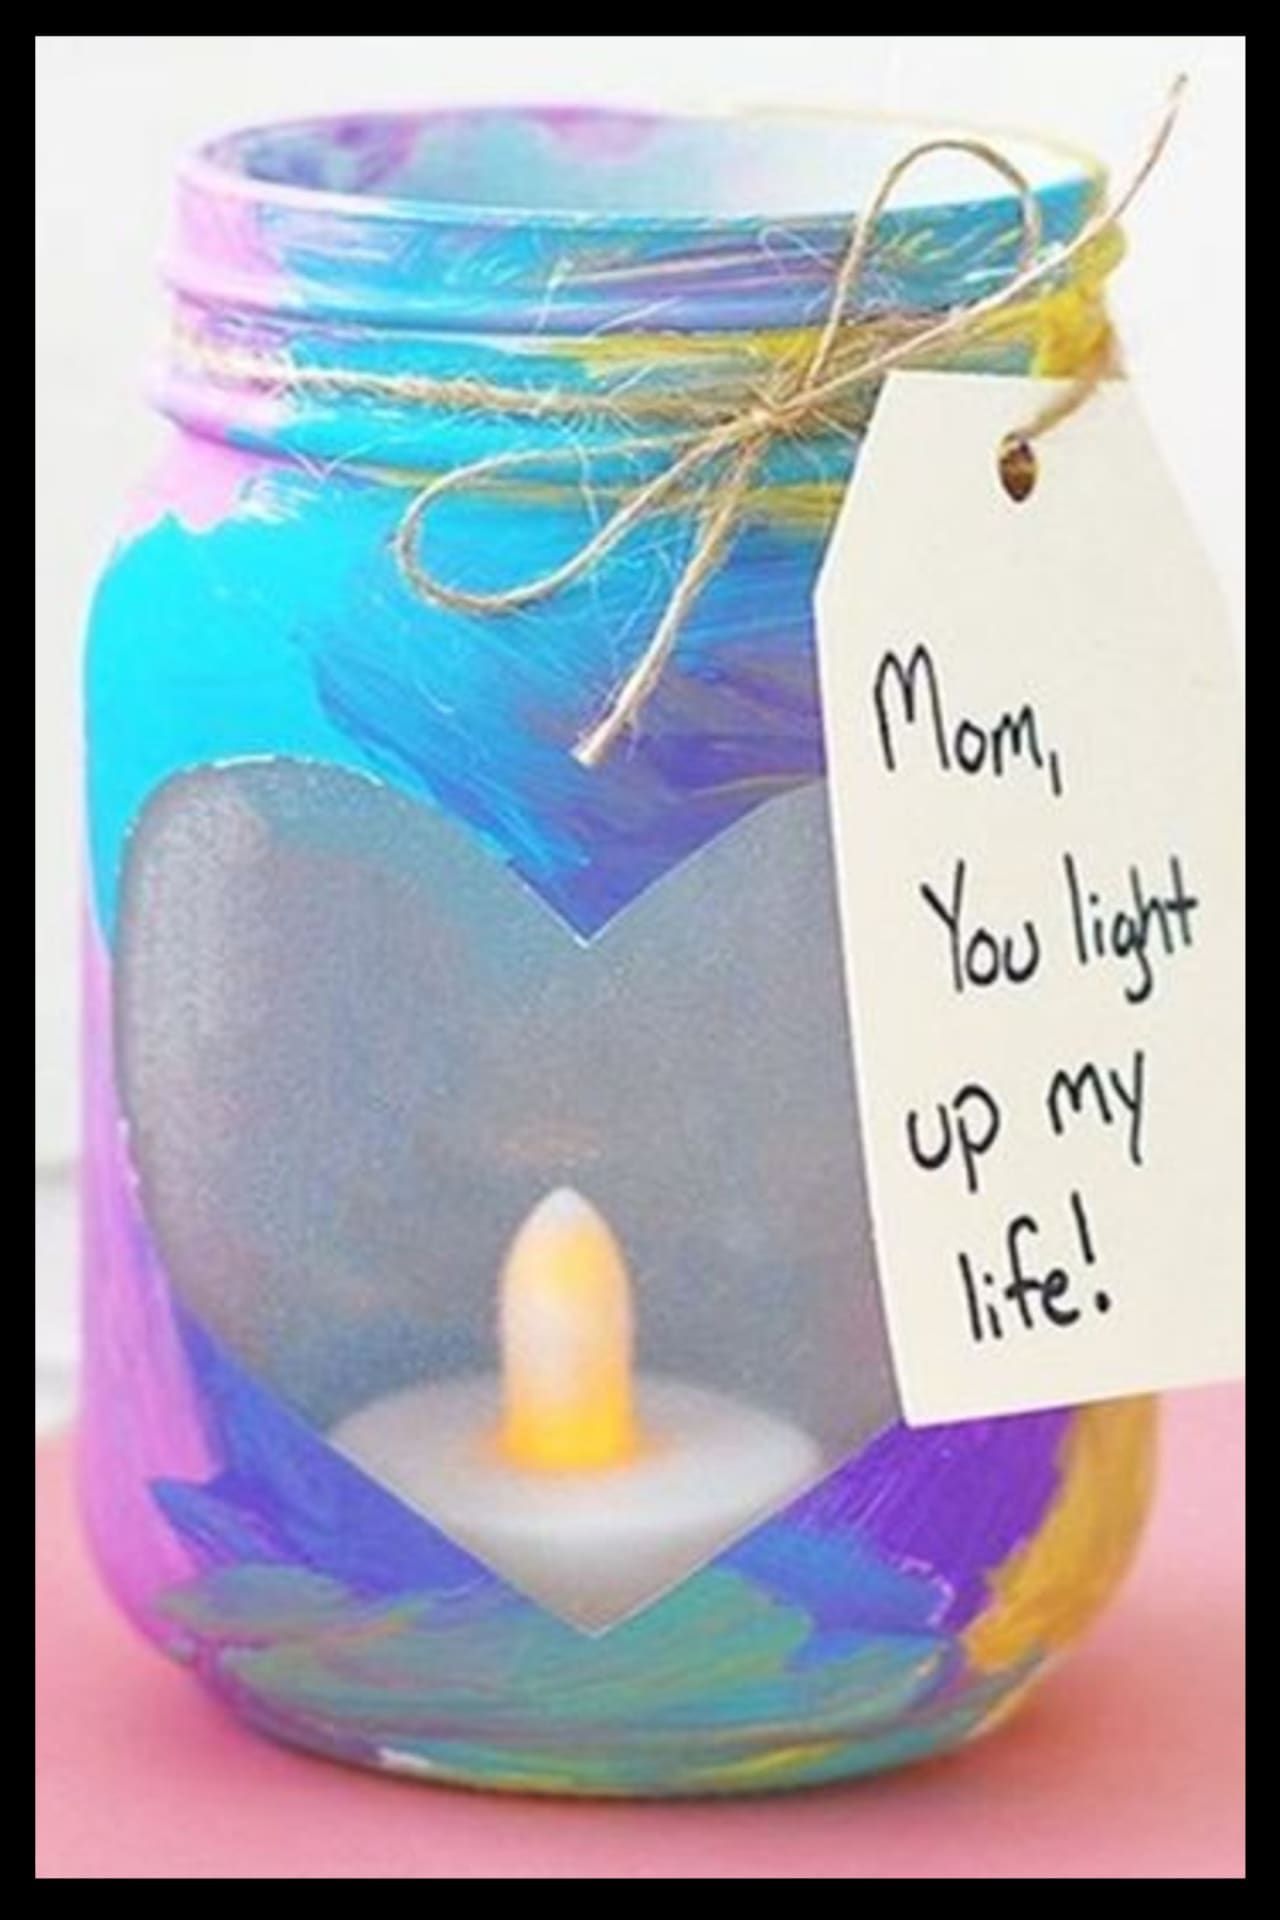 Easy DIY Gifts For Mom From Kids - Clever DIY Ideas -   18 diy projects For Mom kids ideas